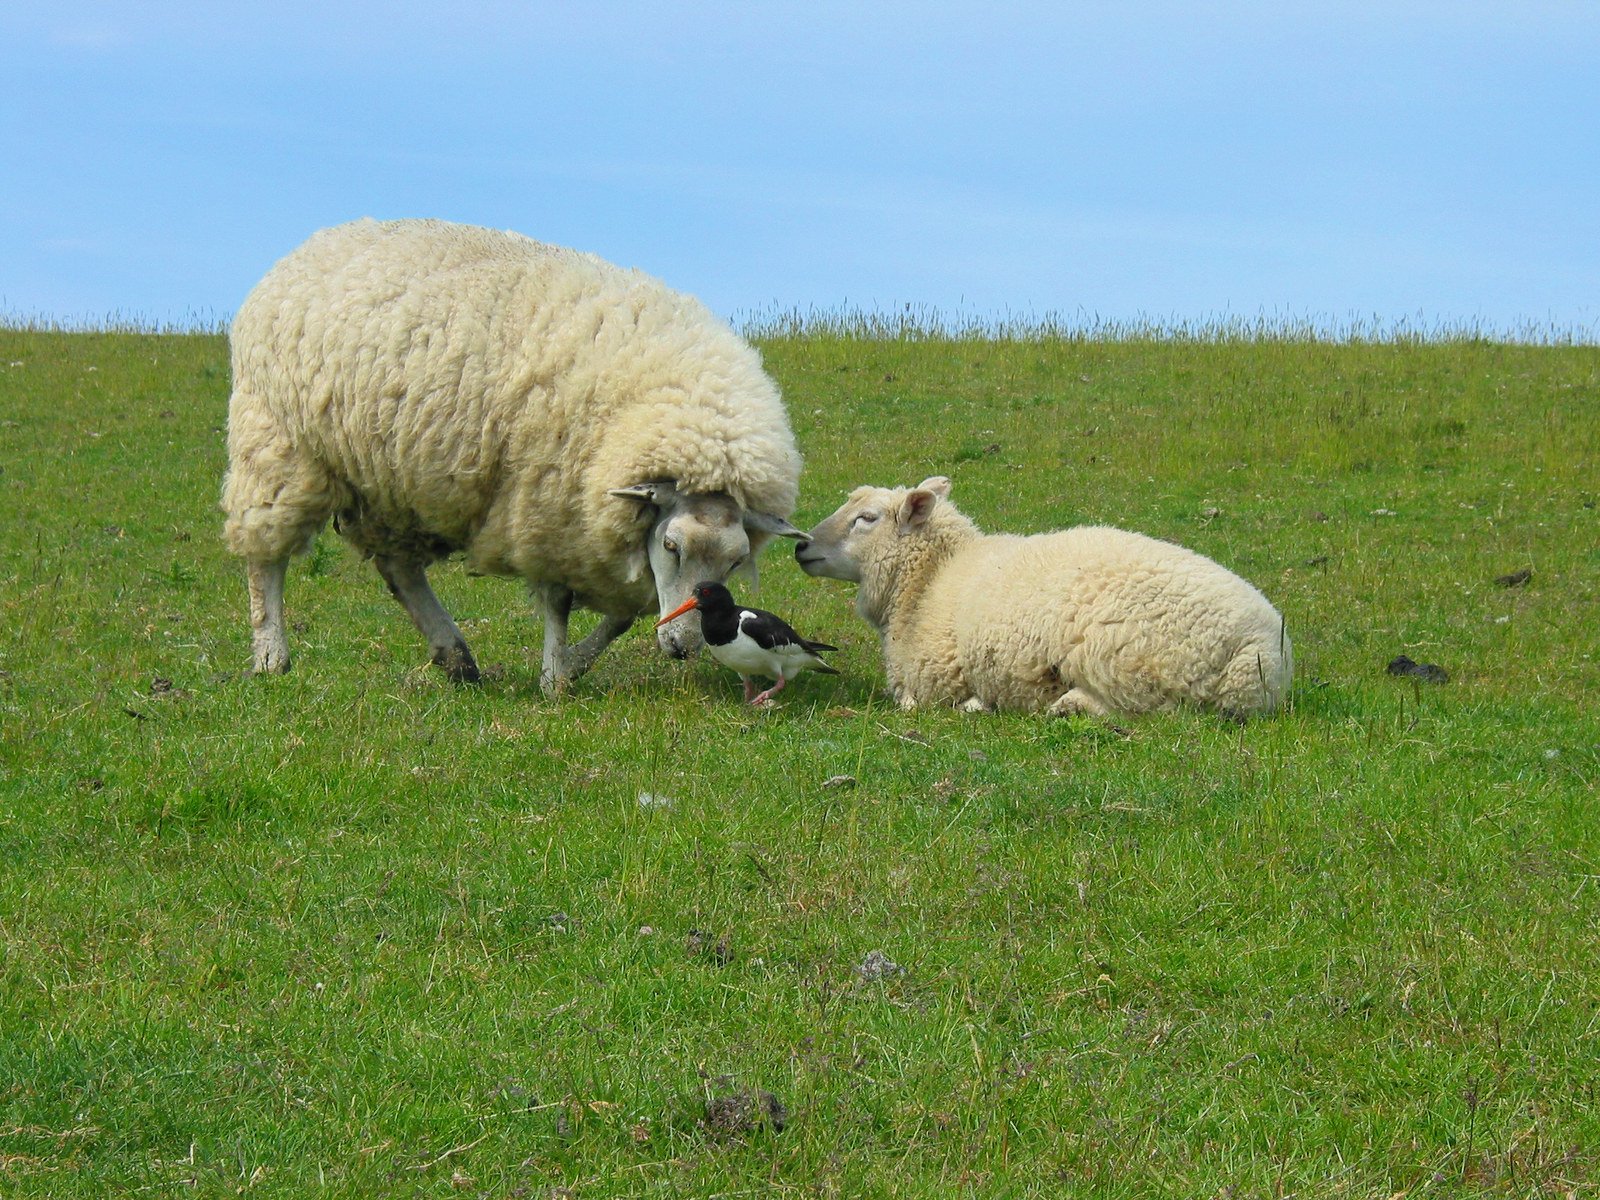 an adult sheep and two lambs standing in a grassy field